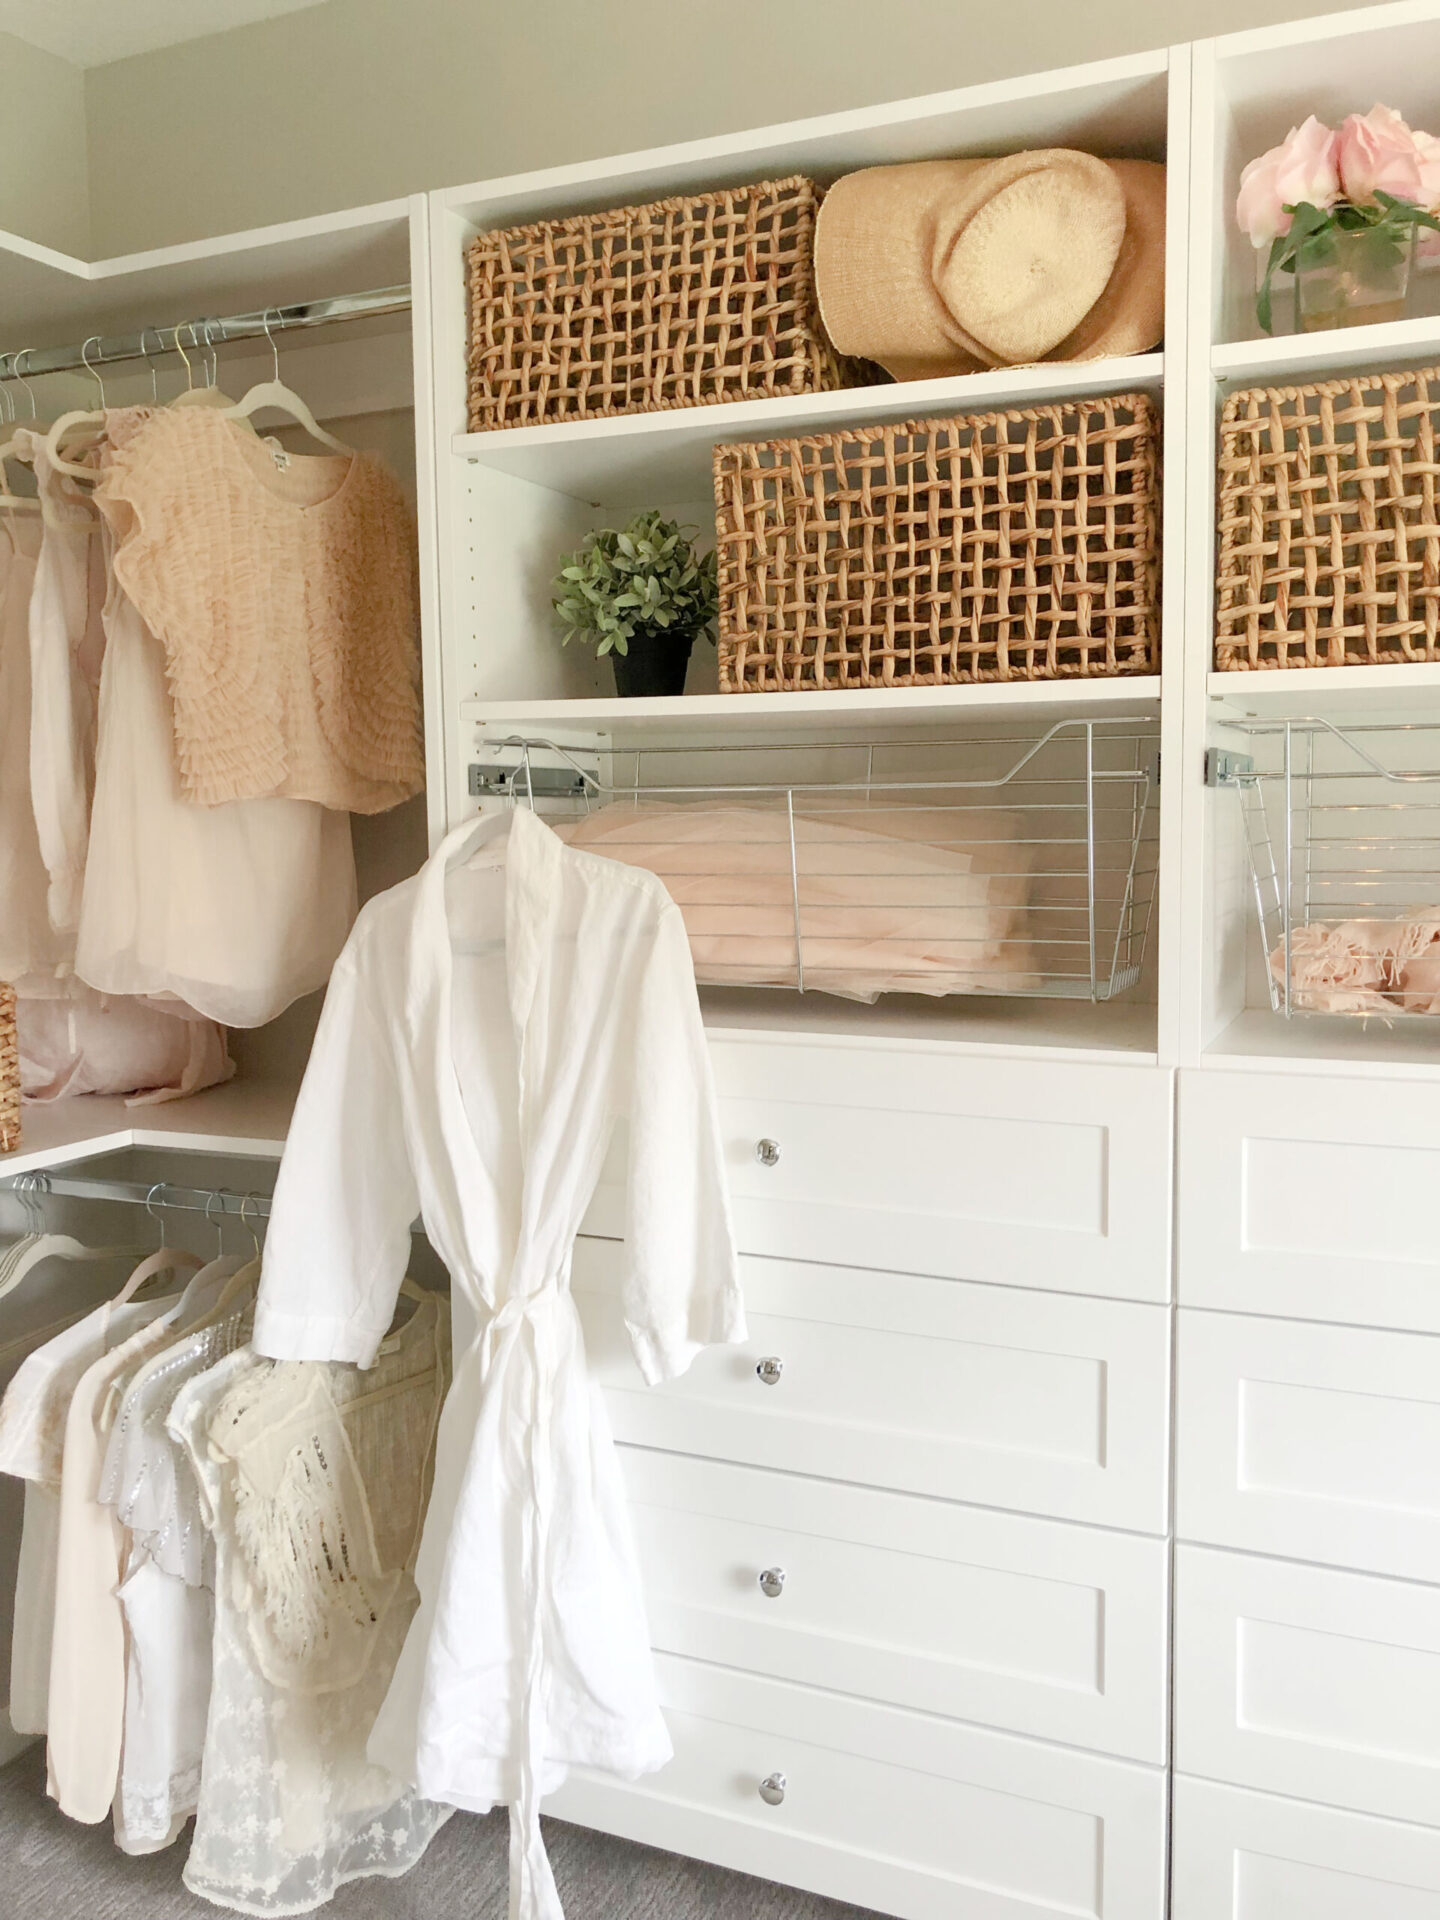 Serene and airy, this customized closet transformed an ugly bedroom and is a pleasure to relax in - Hello Lovely Studio.